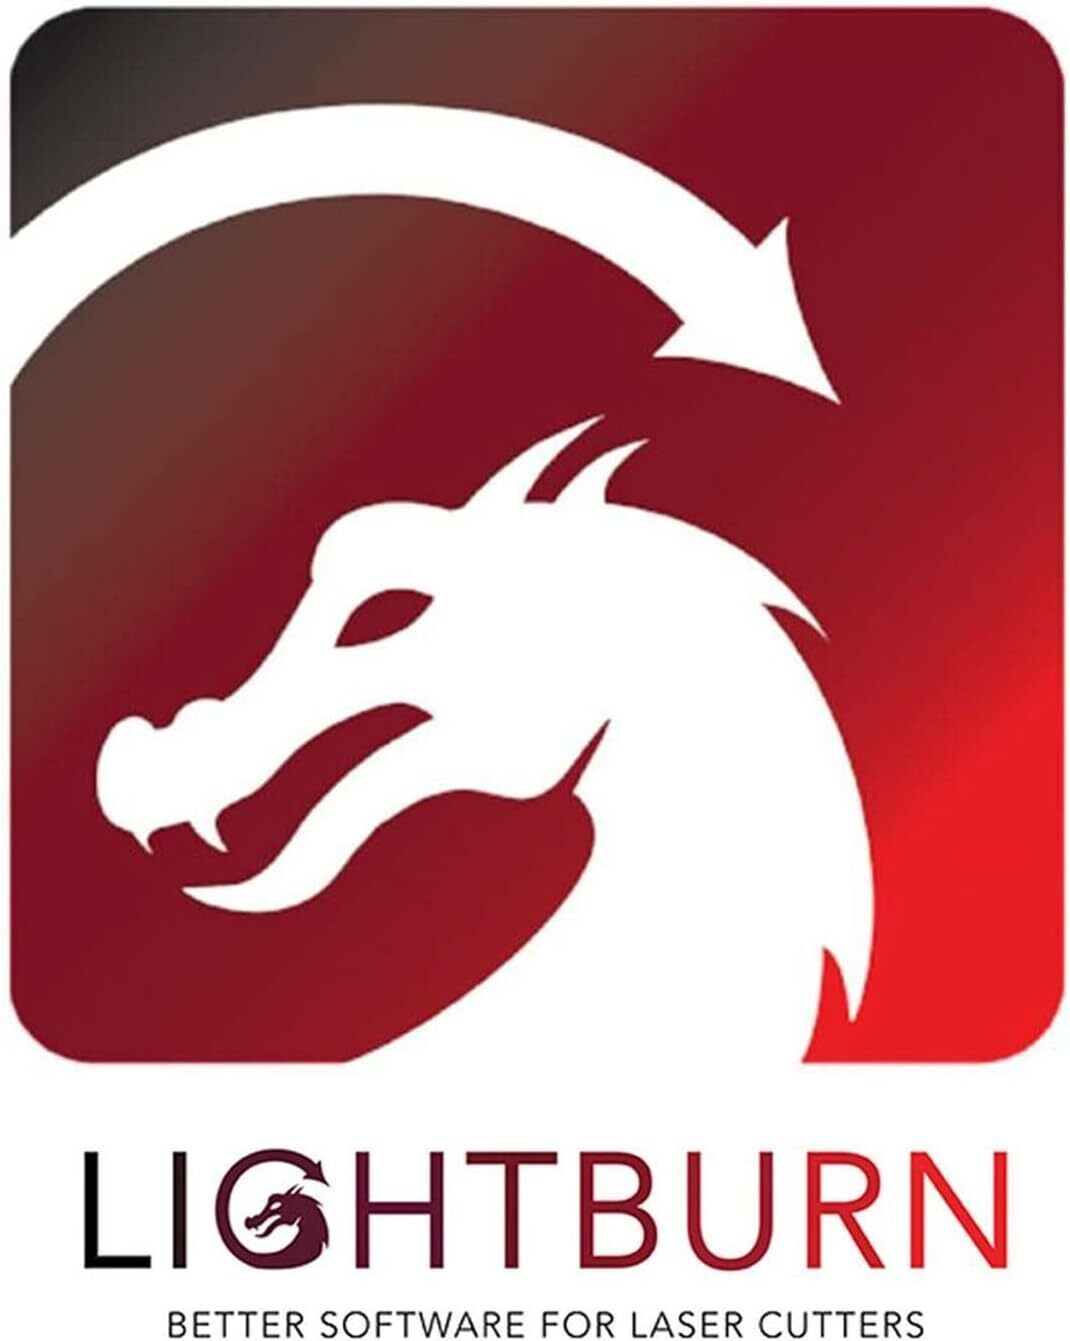 LIGHTBURN™ Software License Product Key Compatible & Windows PC MacOS X Linux